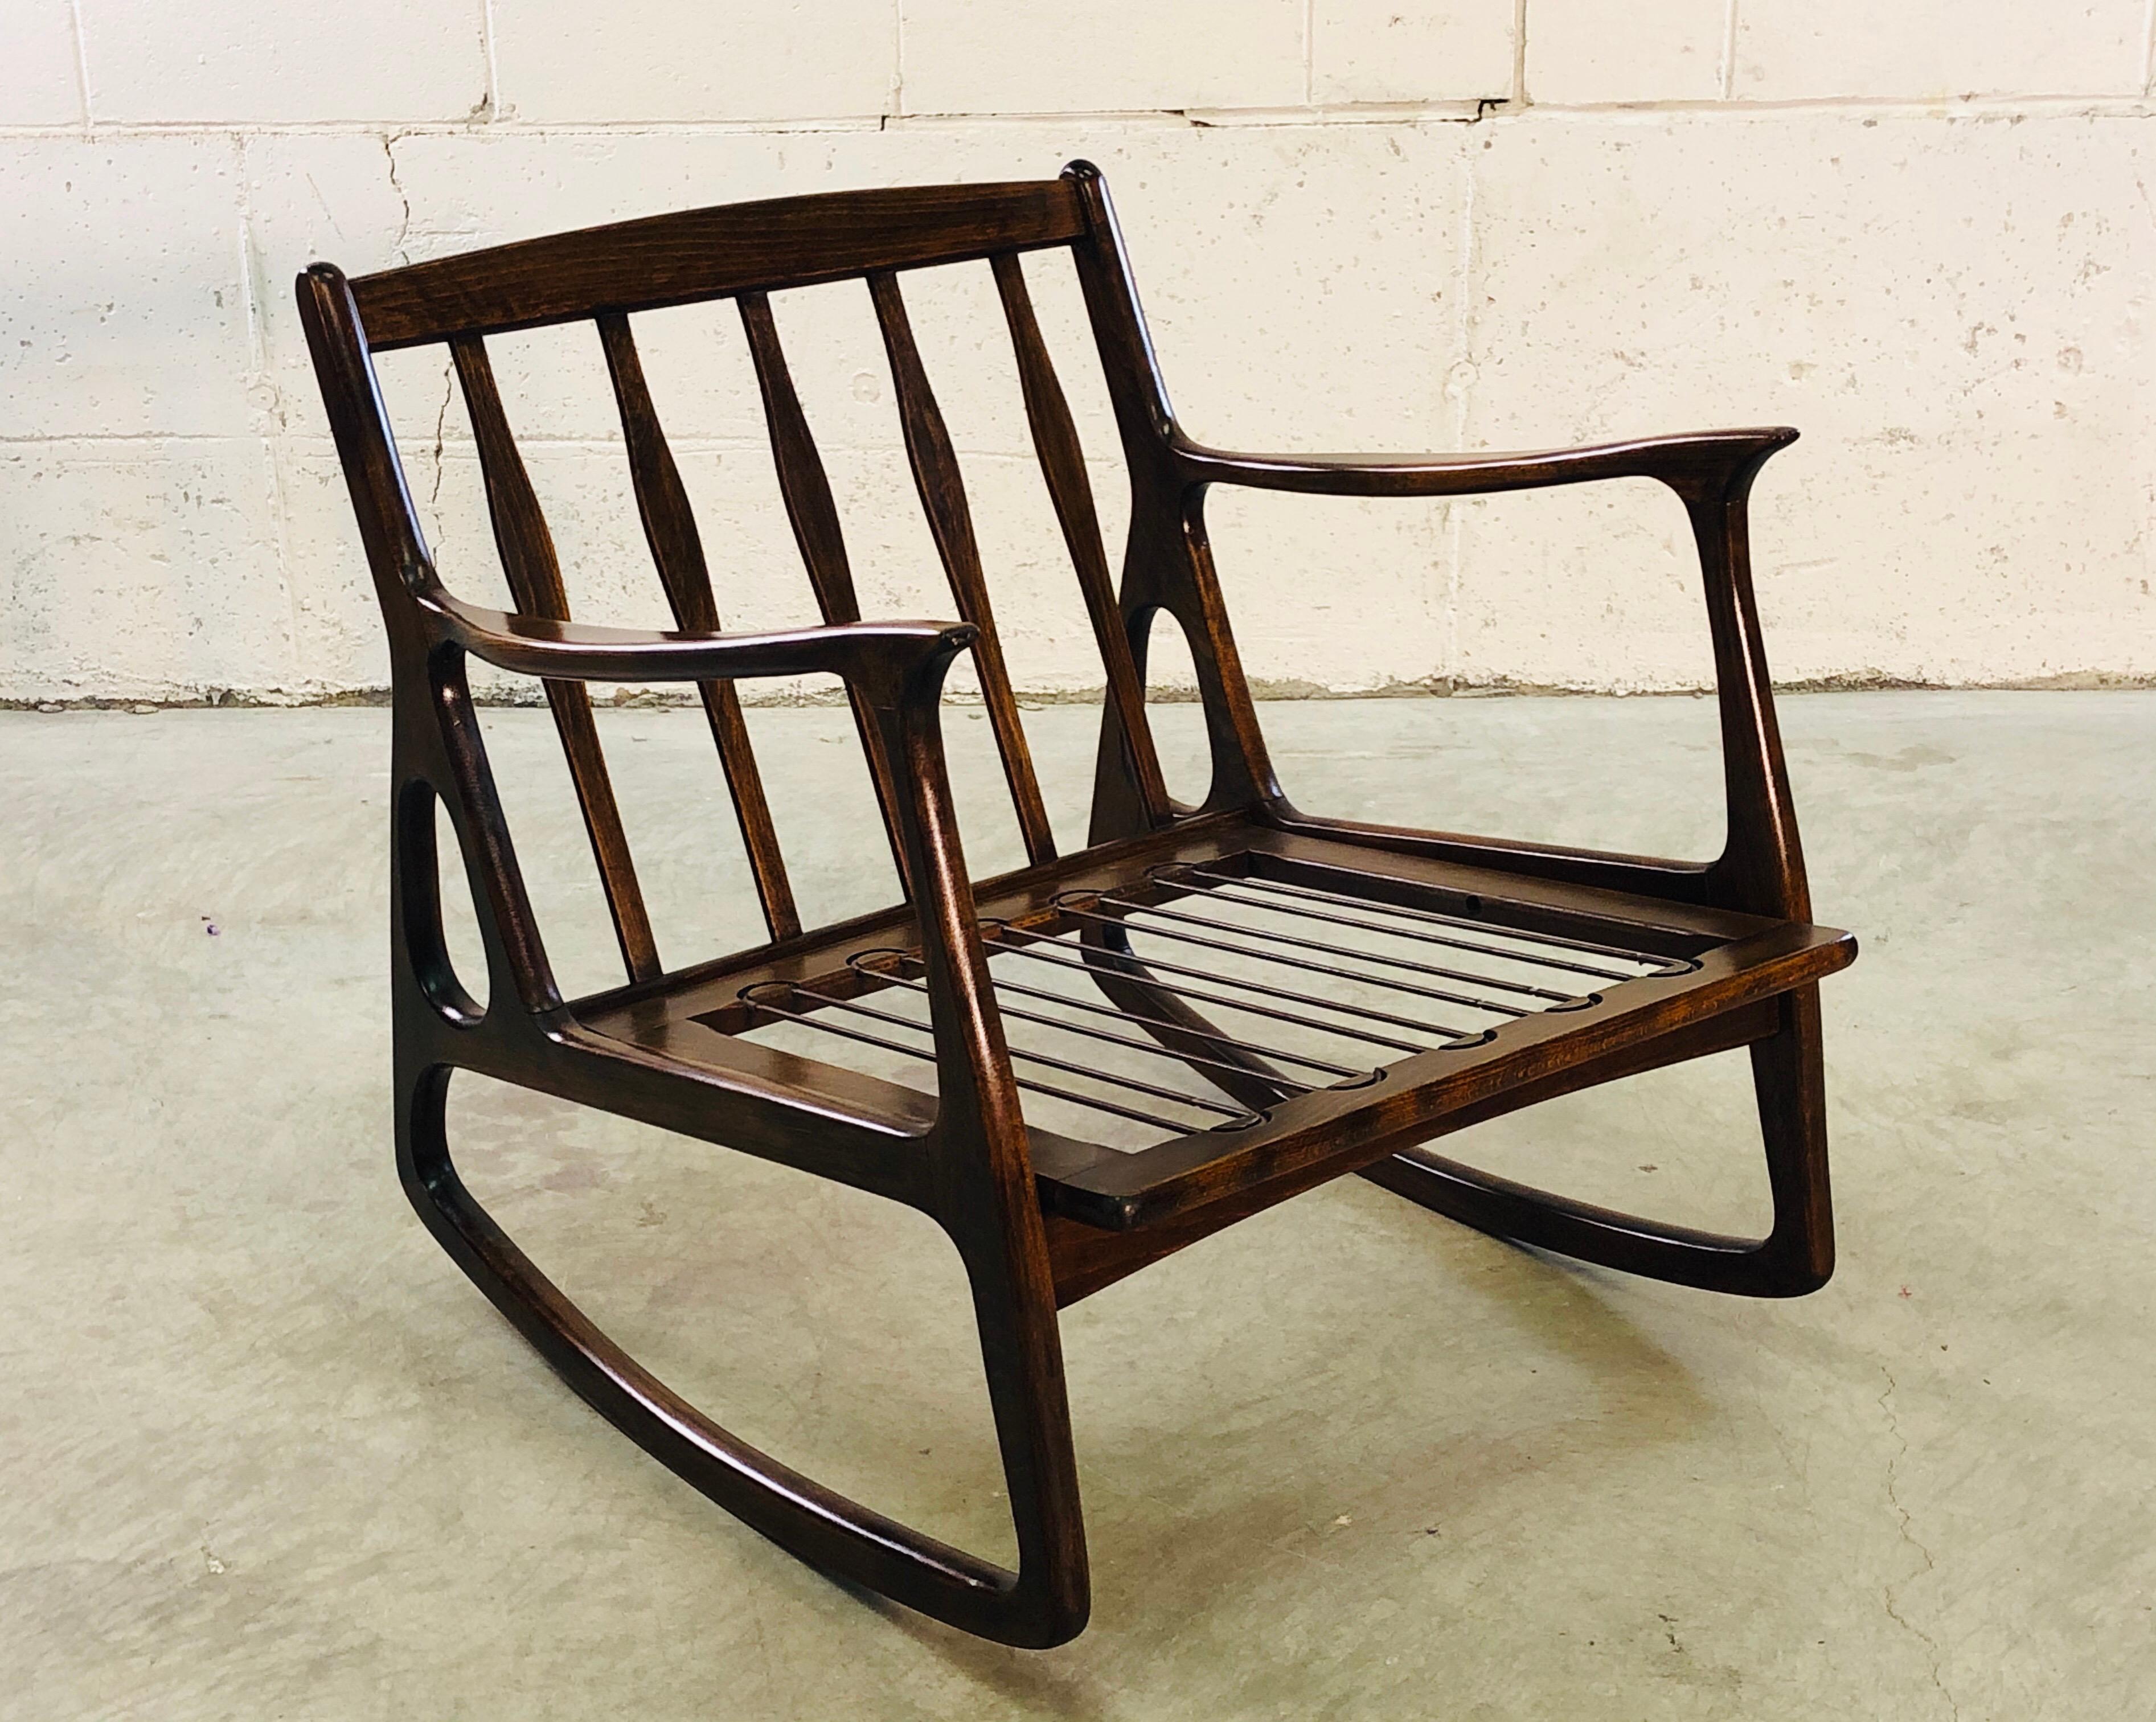 Vintage 1960s Italian dark beechwood rocking chair. The chair has thin, nicely designed arms and is in a dark wood finish. Chair and straps are sturdy, cushions not provided. Marked Italy.